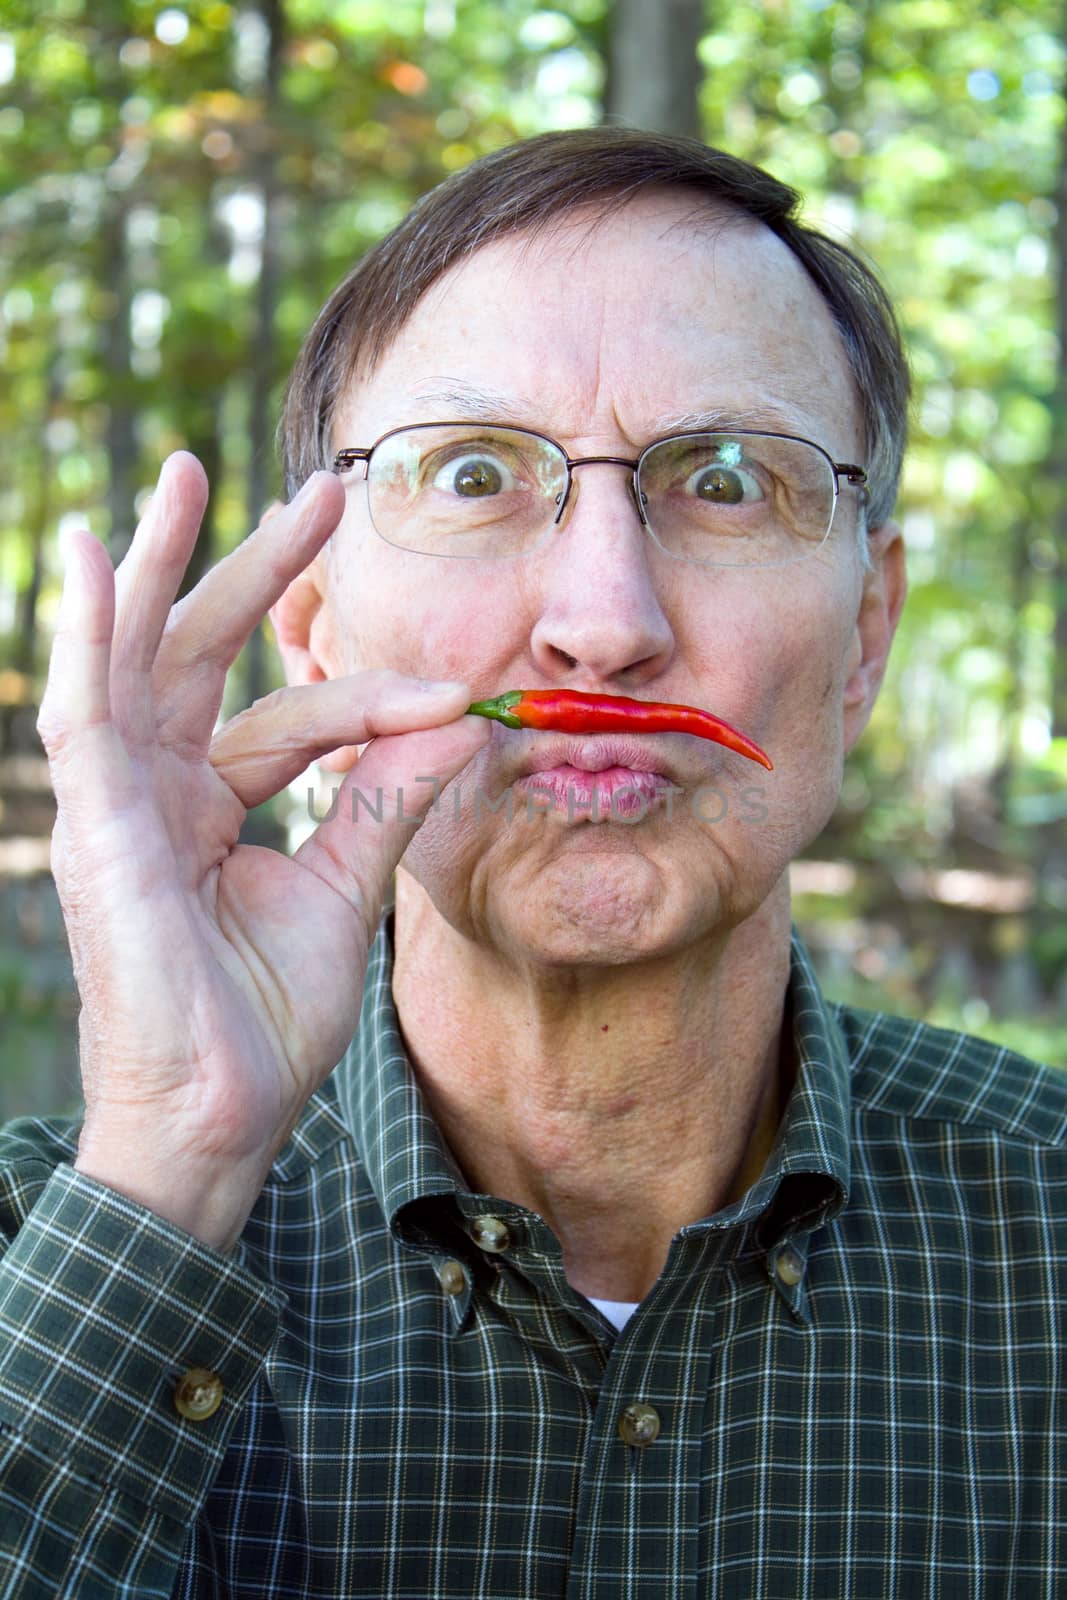 Senior adult holds a red chili pepper under his nose in a mustache position with a silly look on his face.